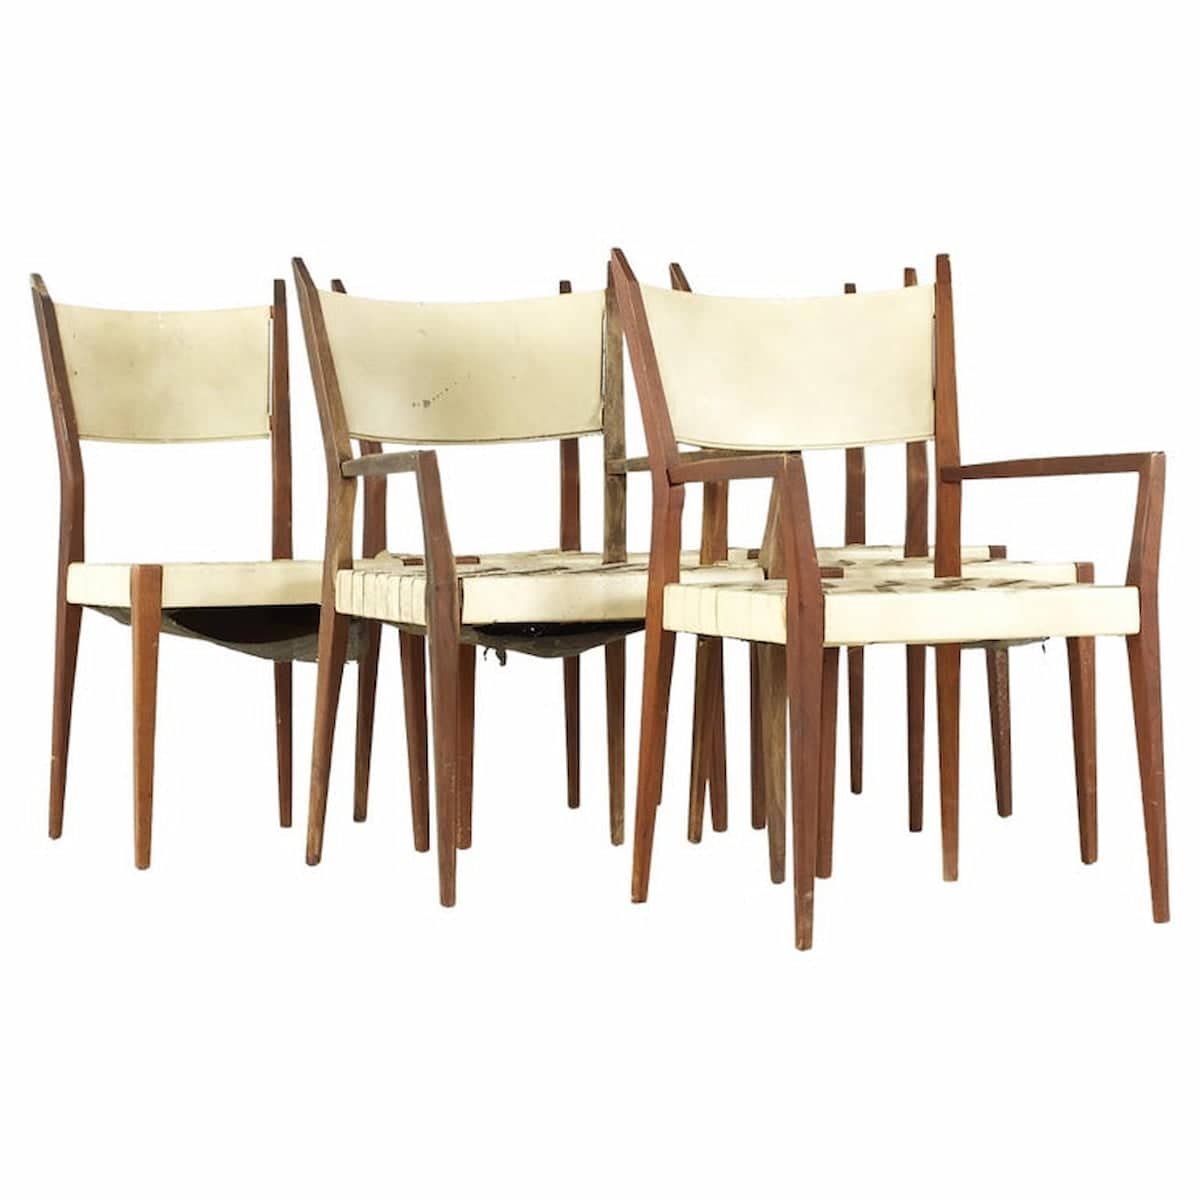 Paul Mccobb Mid Century Woven Leather and Mahogany Dining Chairs - Set of 6